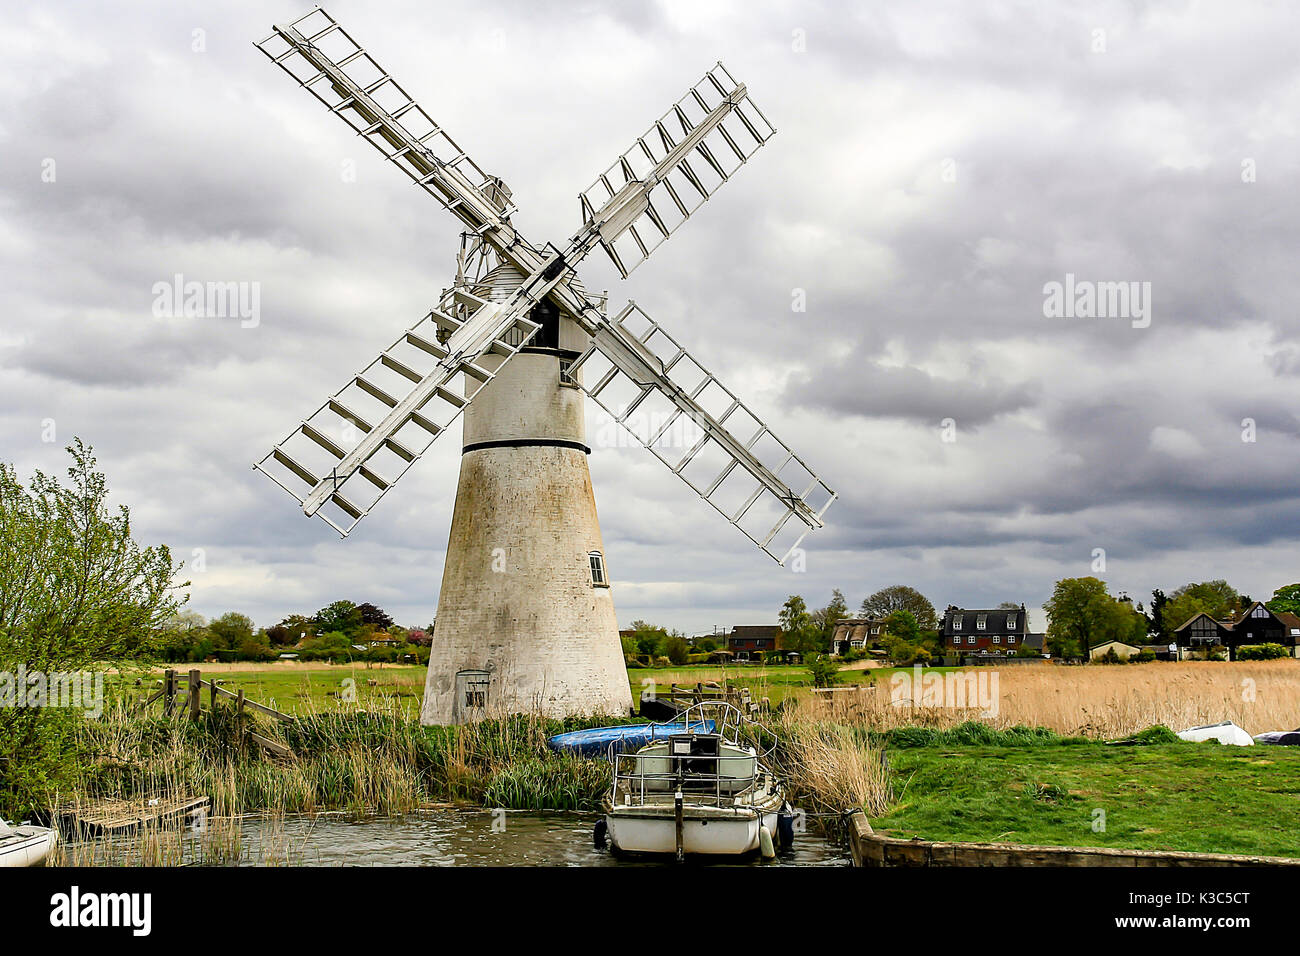 Windmill on the Norfolk Broads with a small boat moored alongside.  The image was taken on the 11 May 2013mill, power, turbine, generator, renewable, Stock Photo